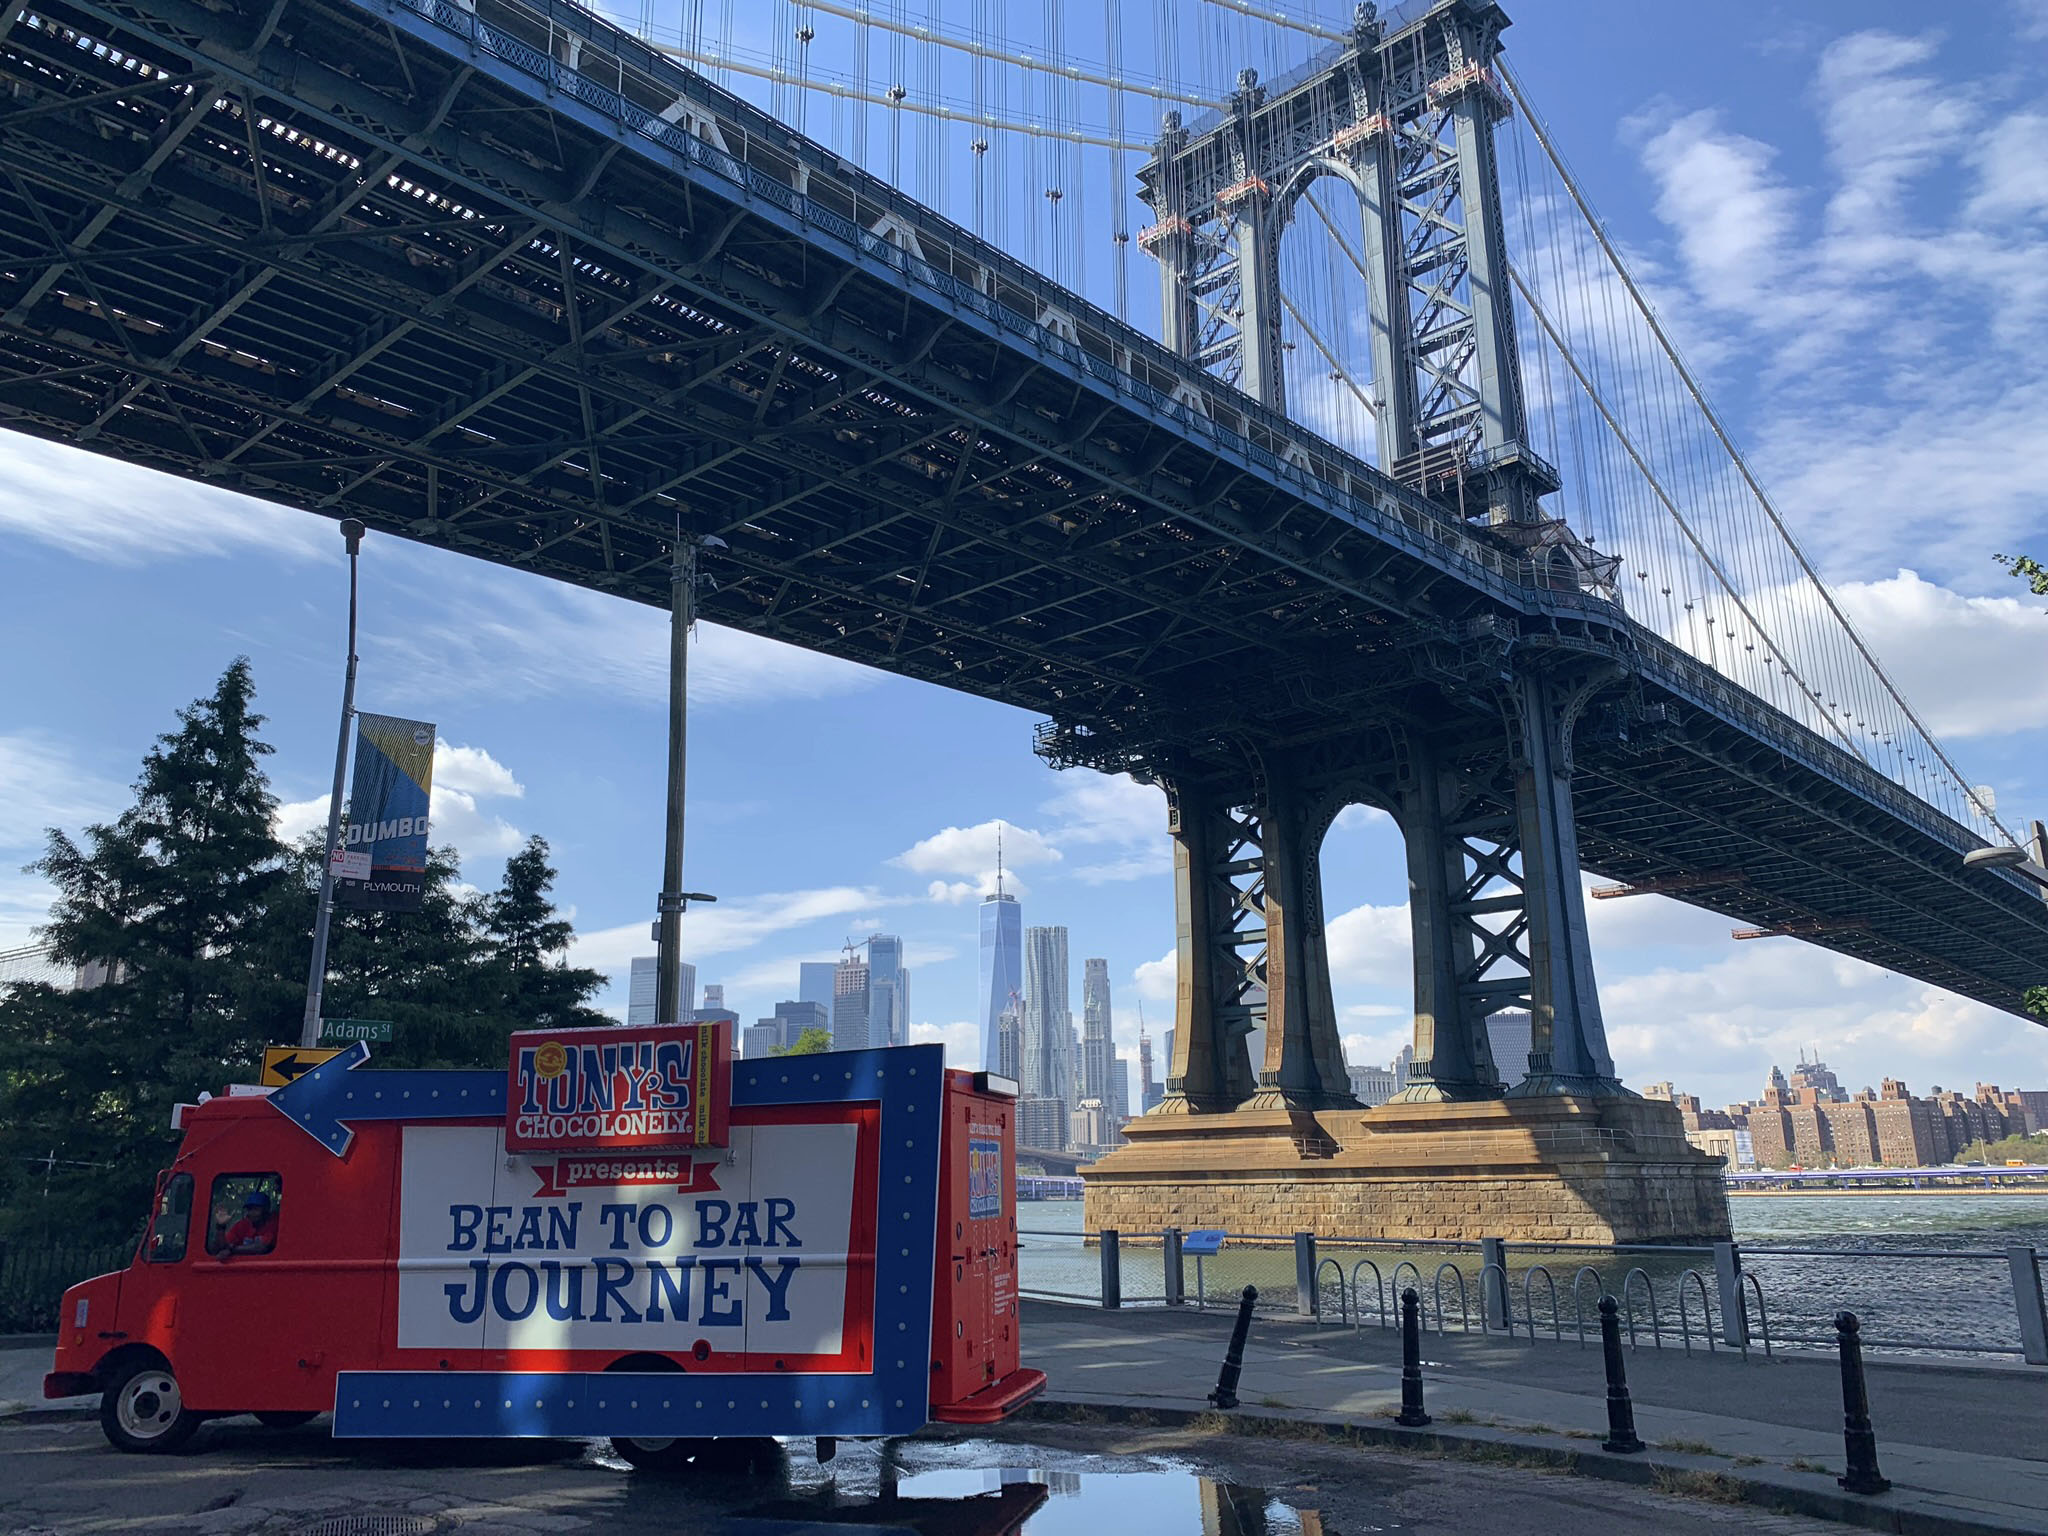 Hey, Brooklyn! We're bringing a smorgasbord of chocolate to Smorgasburg on the Williamsburg waterfront tomorrow. Pretty fitting, eh? Come chat with us about chocolate with your mouth full of chocolate tomorrow from 11-7!